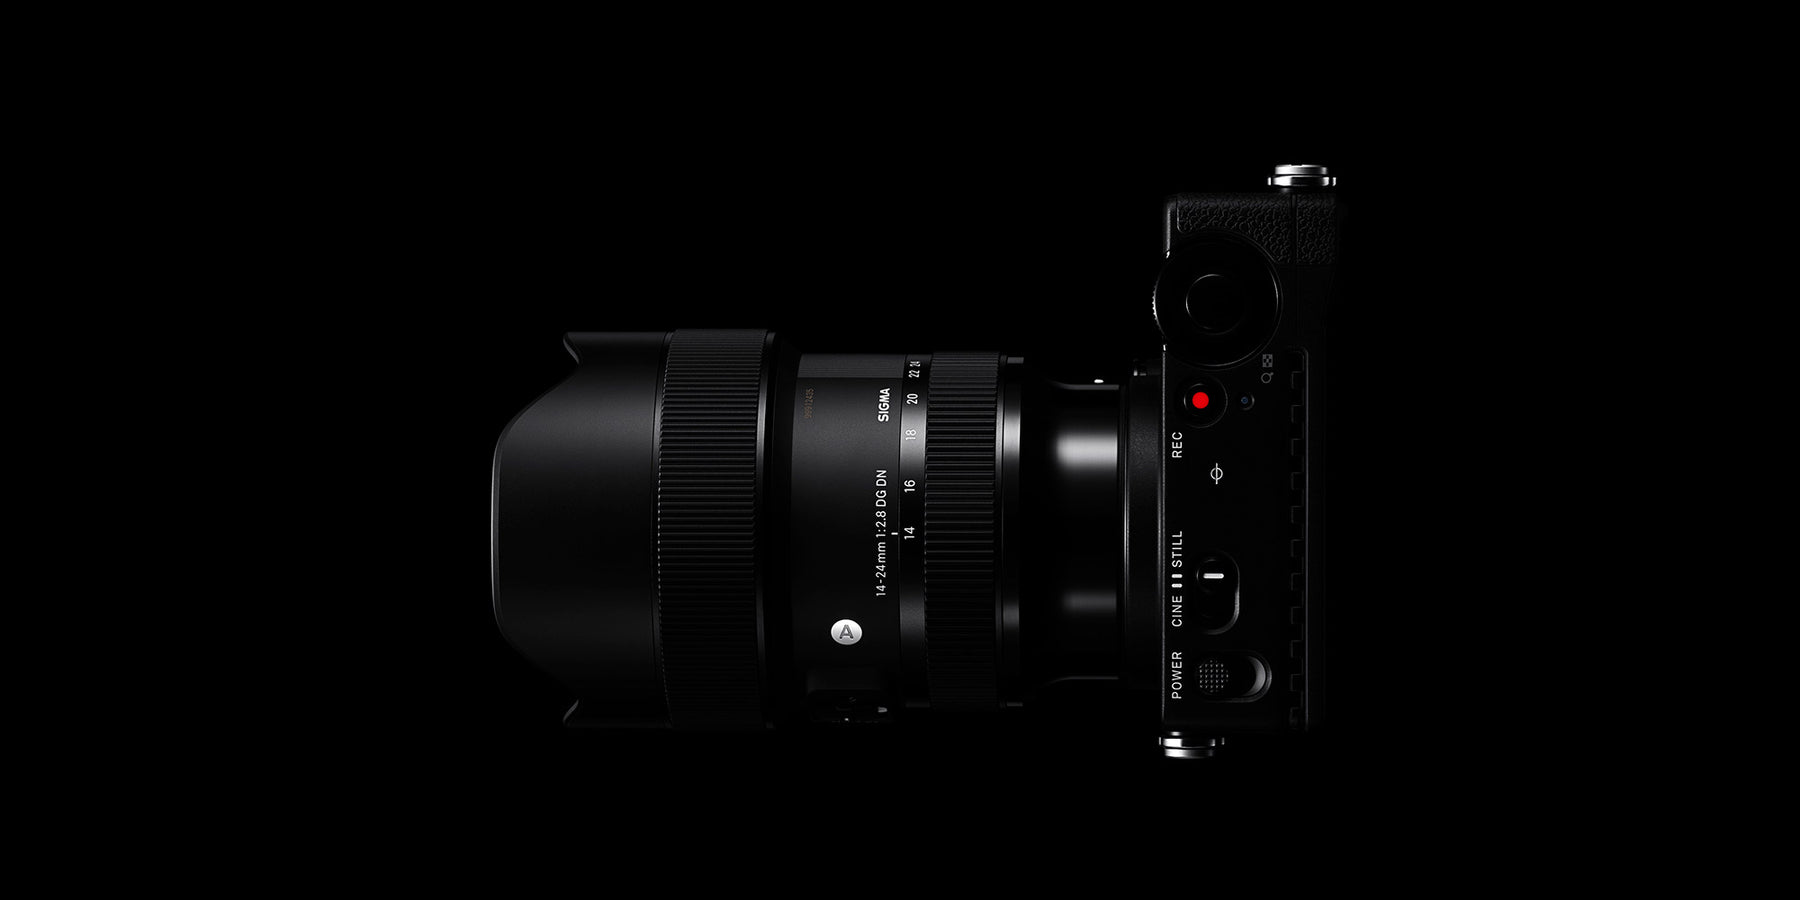 Firmware update for the SIGMA 14-24mm F2.8 DG DN | Art for L-Mount (2022.04.07)